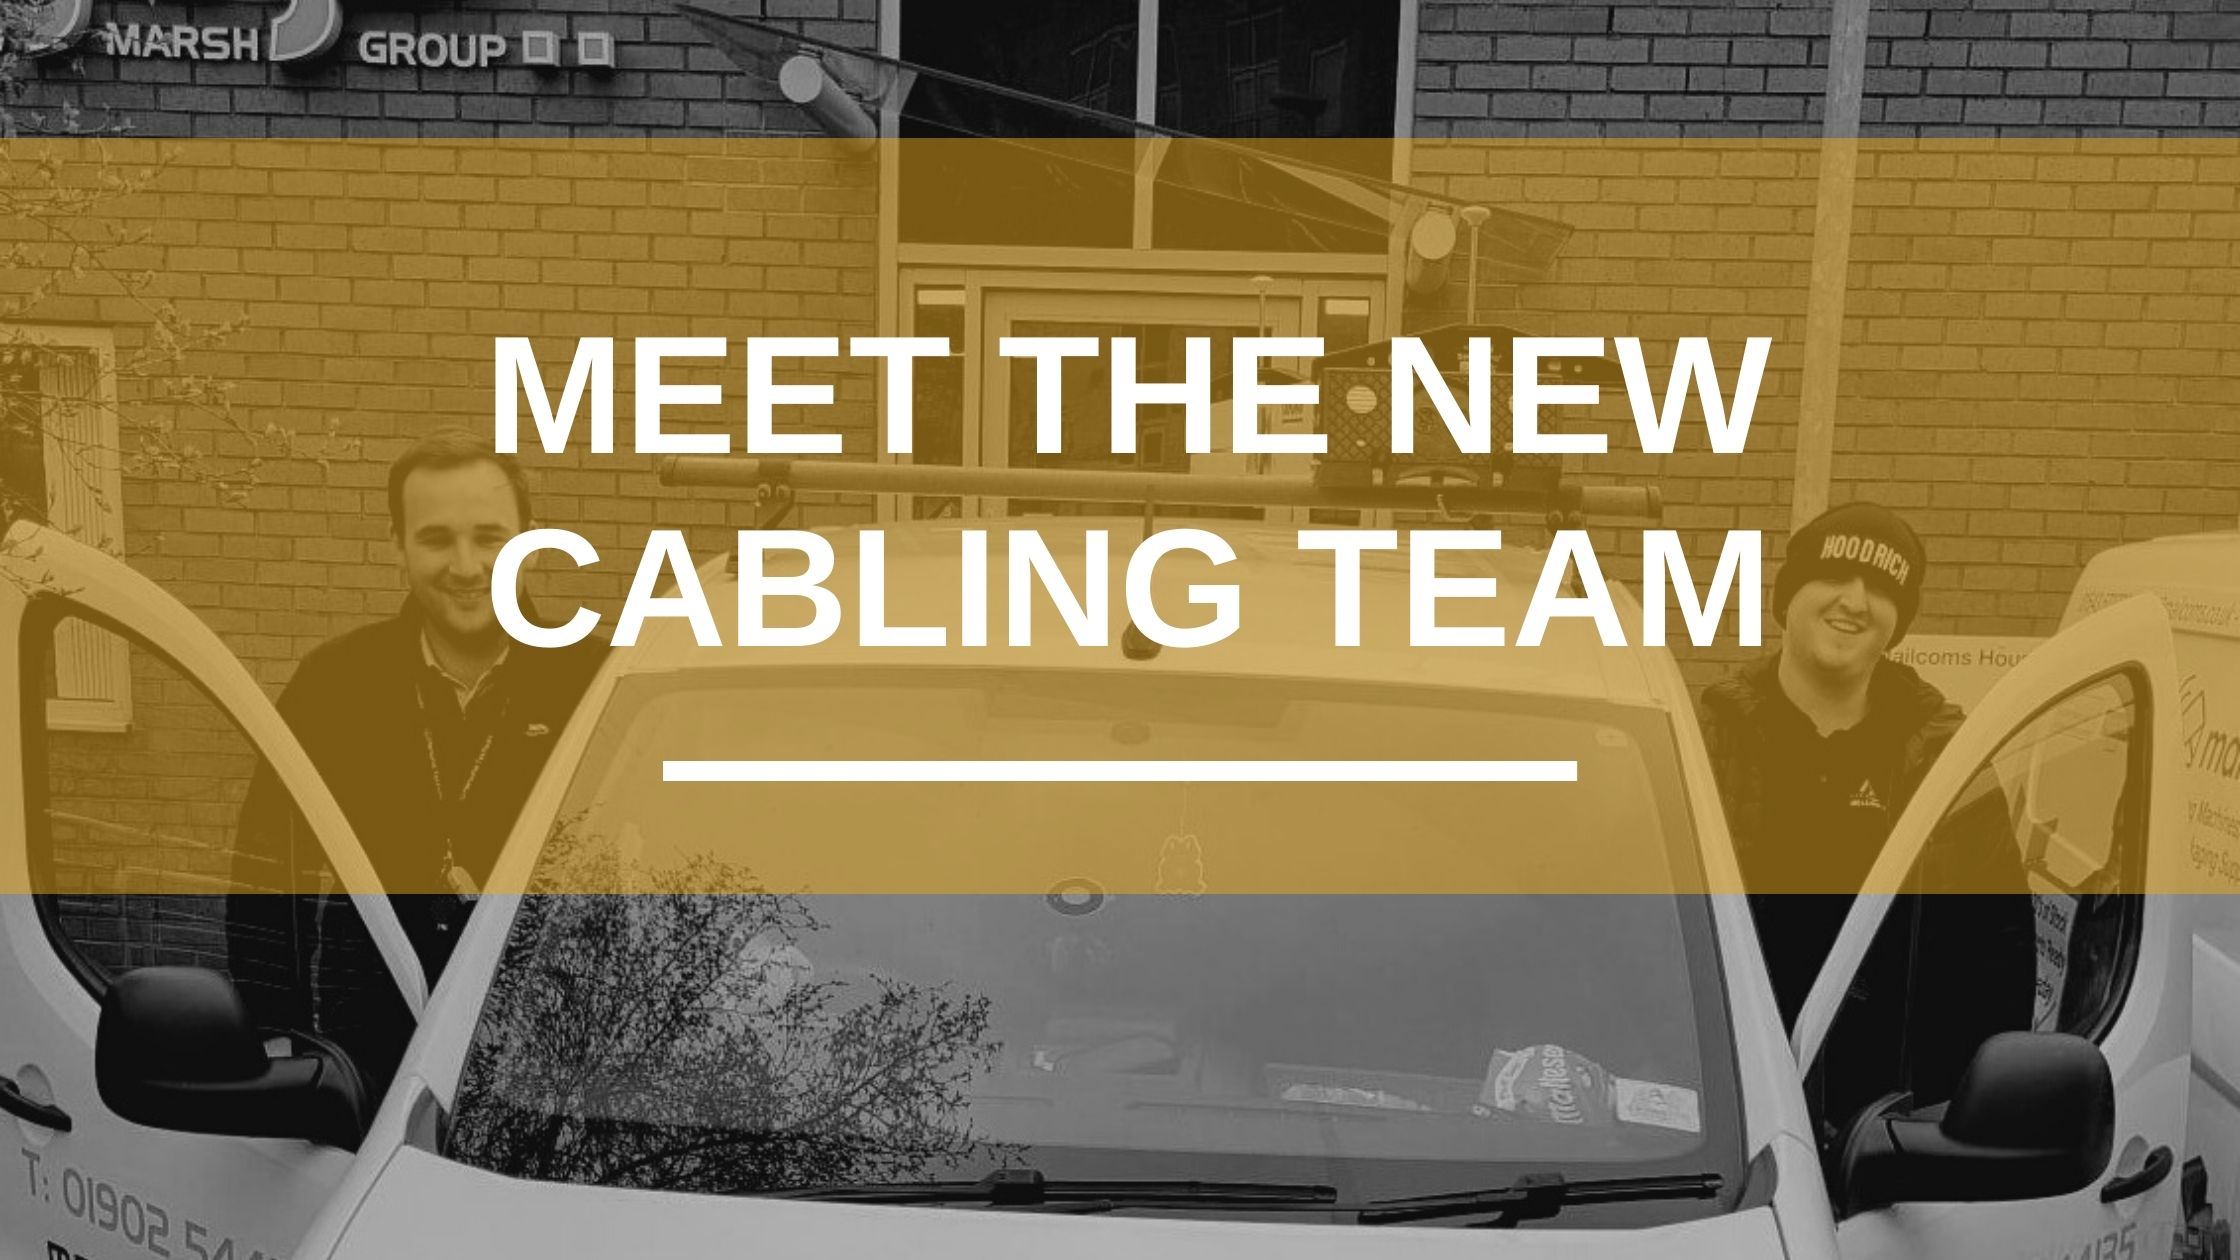 Meet the new cabling team 